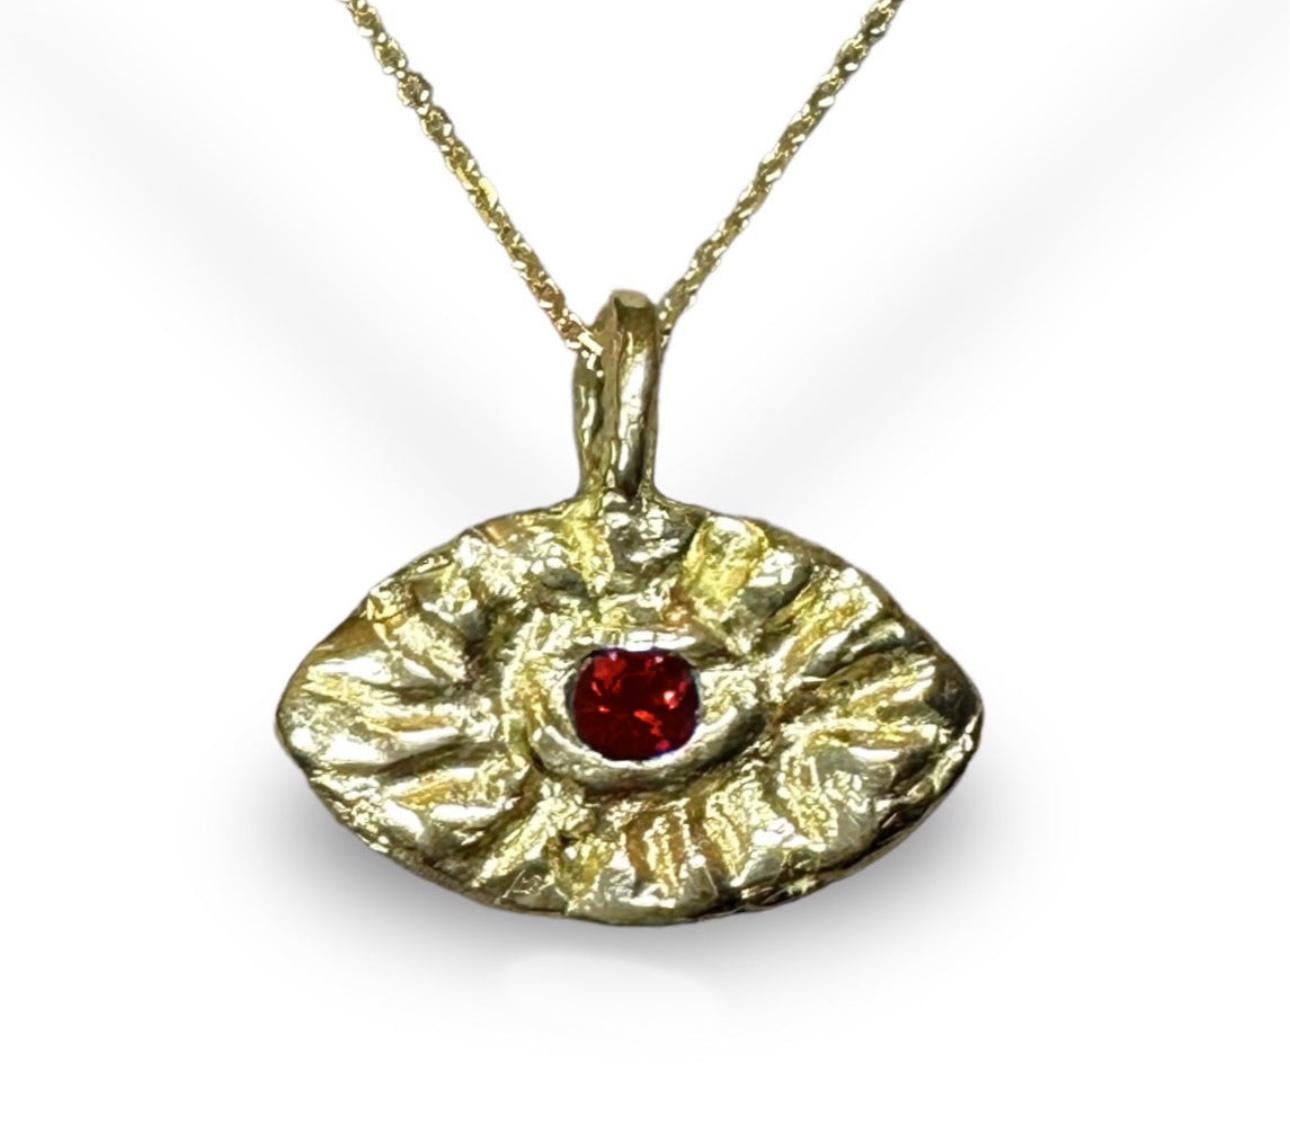 ne of a kind 18K Yellow Gold Eye Pendant designed for men.

The evil eye belief started in ancient Greece and Rome and it is one of the most popular and widely recognised symbols up until this date.  It is believed that it will protect the one who